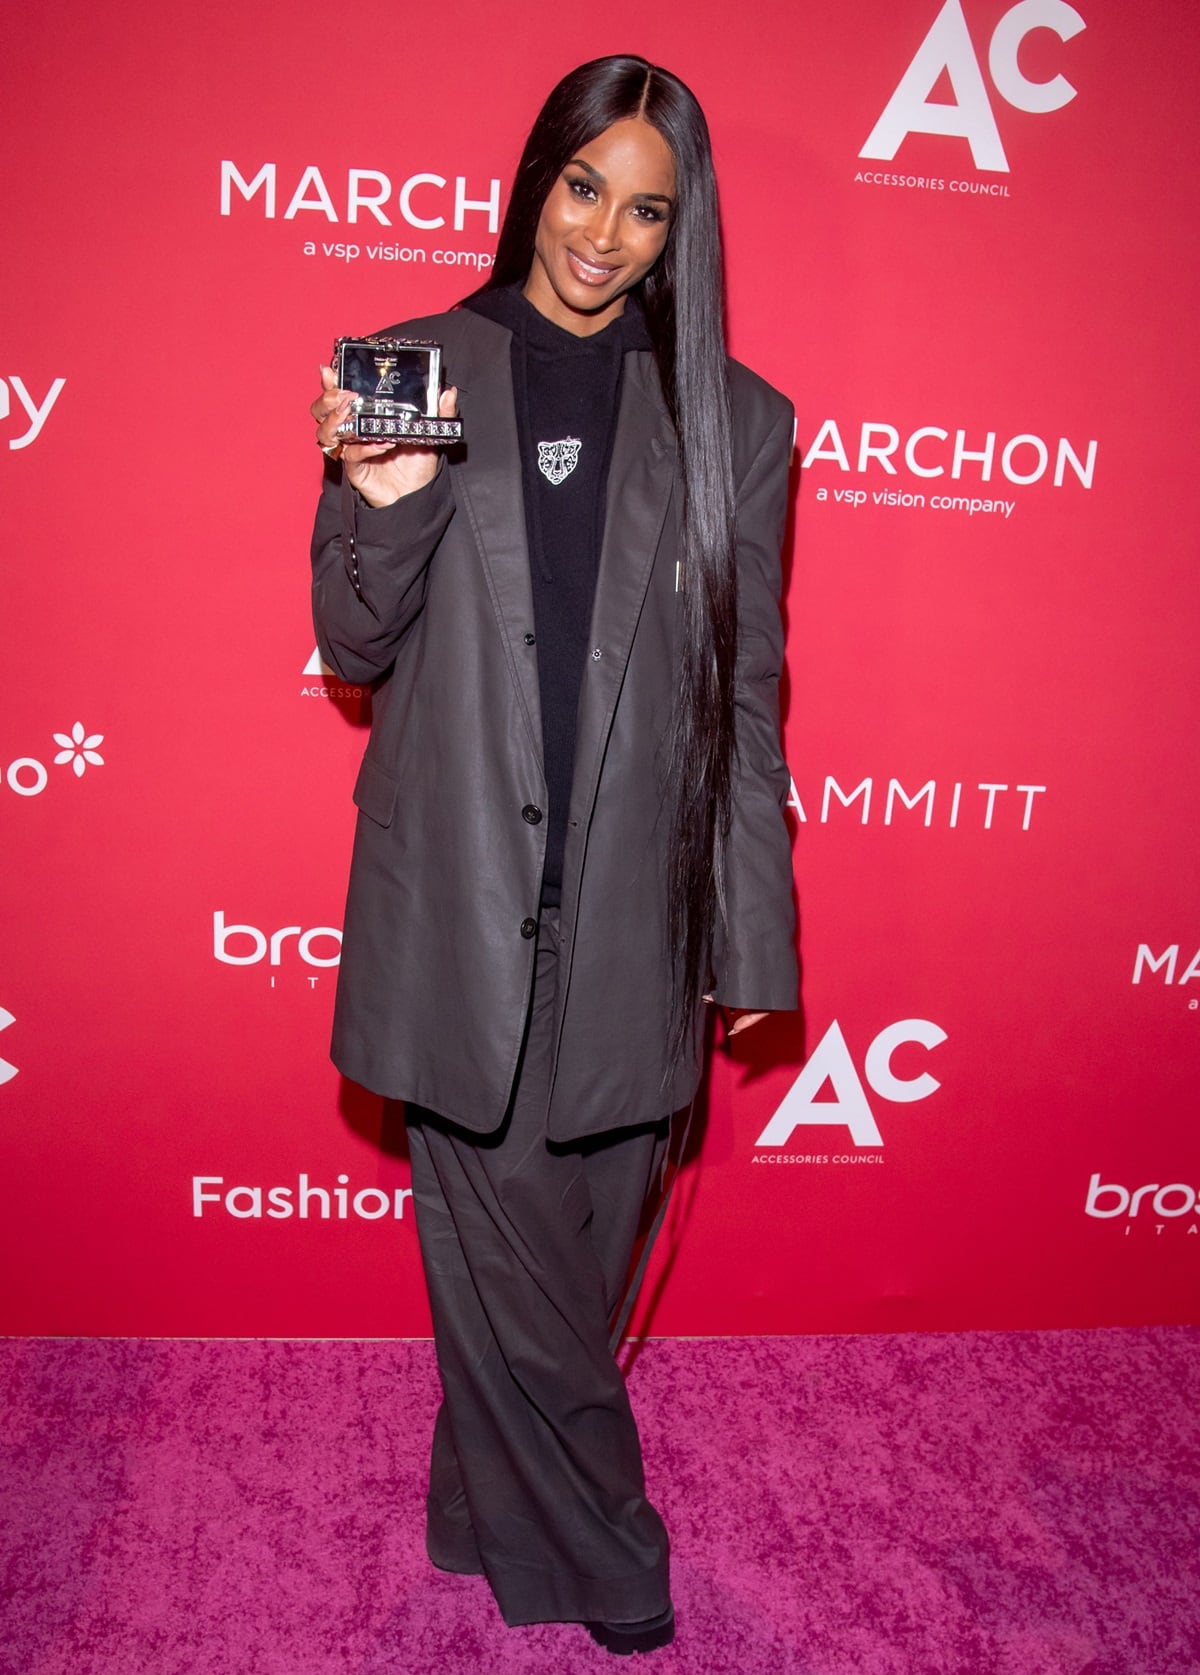 Standing at 5ft 7½ (171.5 cm), Ciara showcased her style at the 27th annual ACE Awards in New York City on May 3, 2023, donning attire from her brand LITA, and received the 'sustainability' award for her fashion venture co-founded with husband Russell Wilson and businesswoman Christine Day